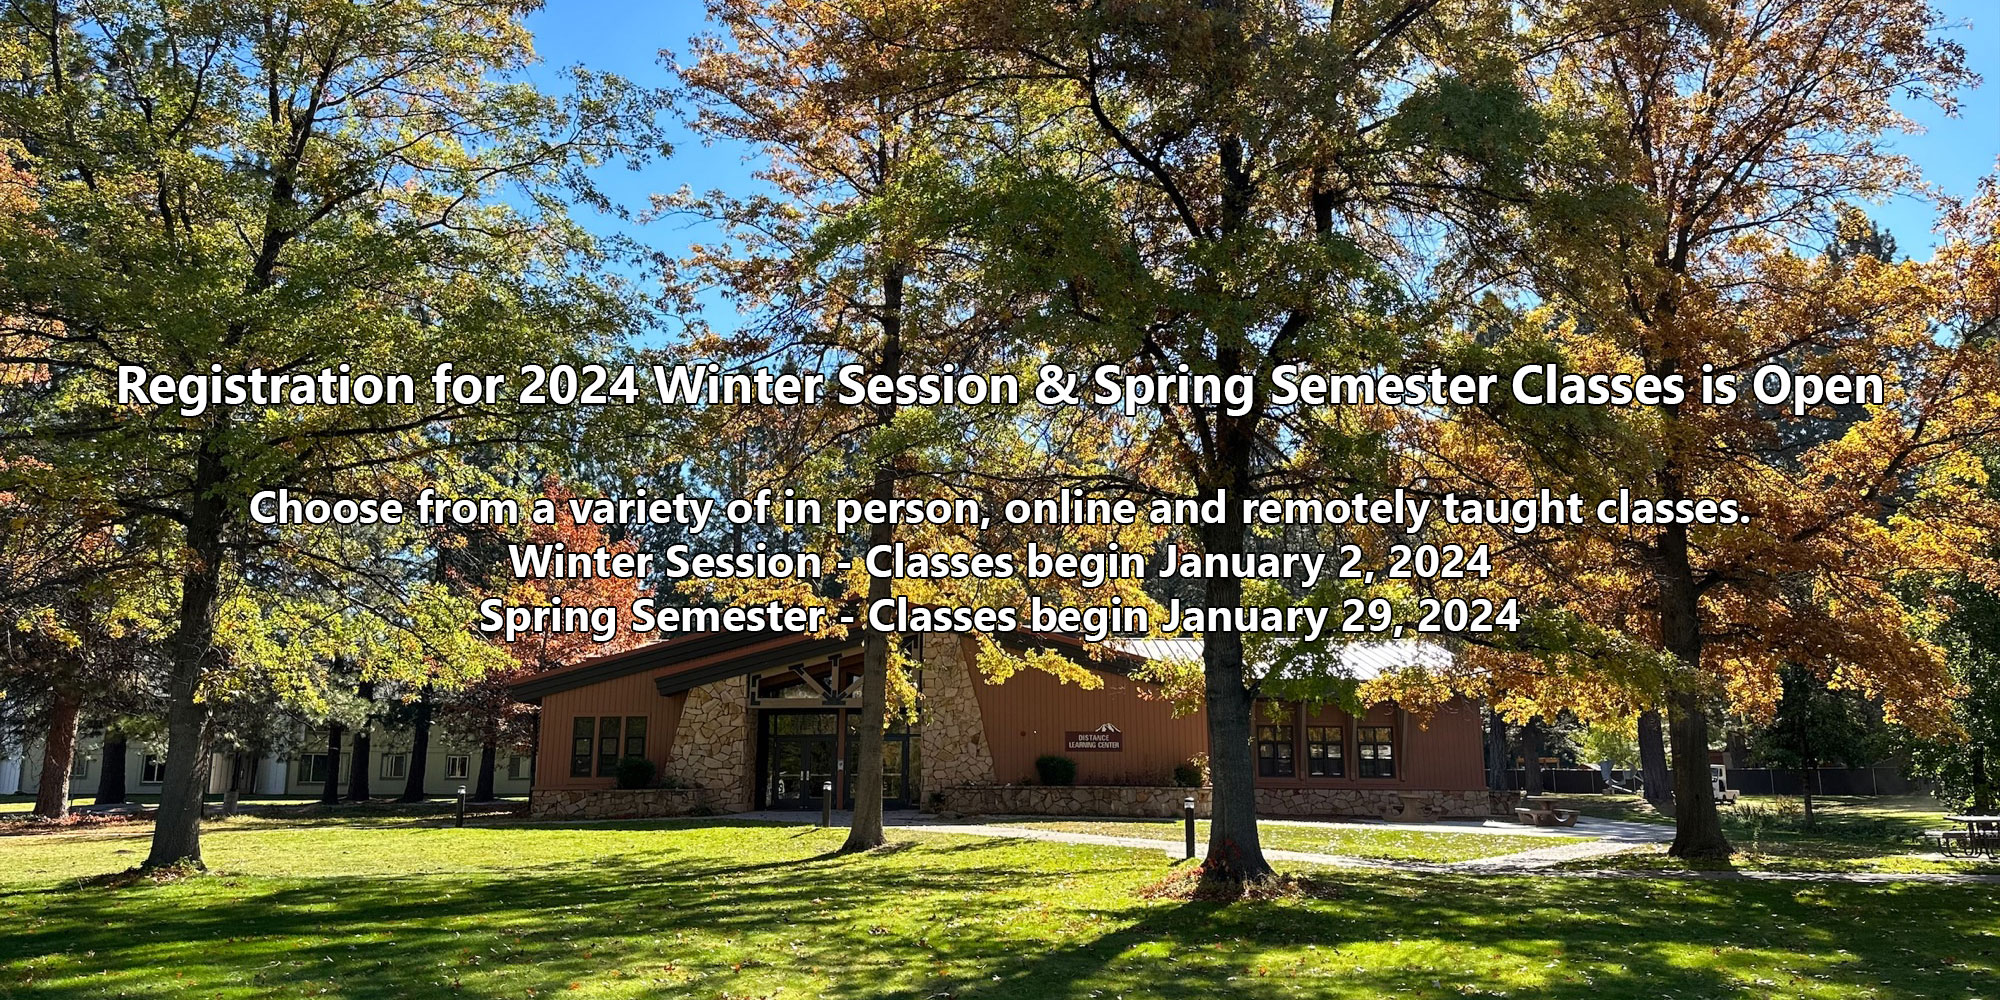 Registration for 2024 Winter Session & Spring Semester Classes is Open. Choose from a variety of in-person, online, and remotely taught classes. Winter Session - Classes begin January 2, 2024. Spring Semester - Classes begin January 29, 2024.